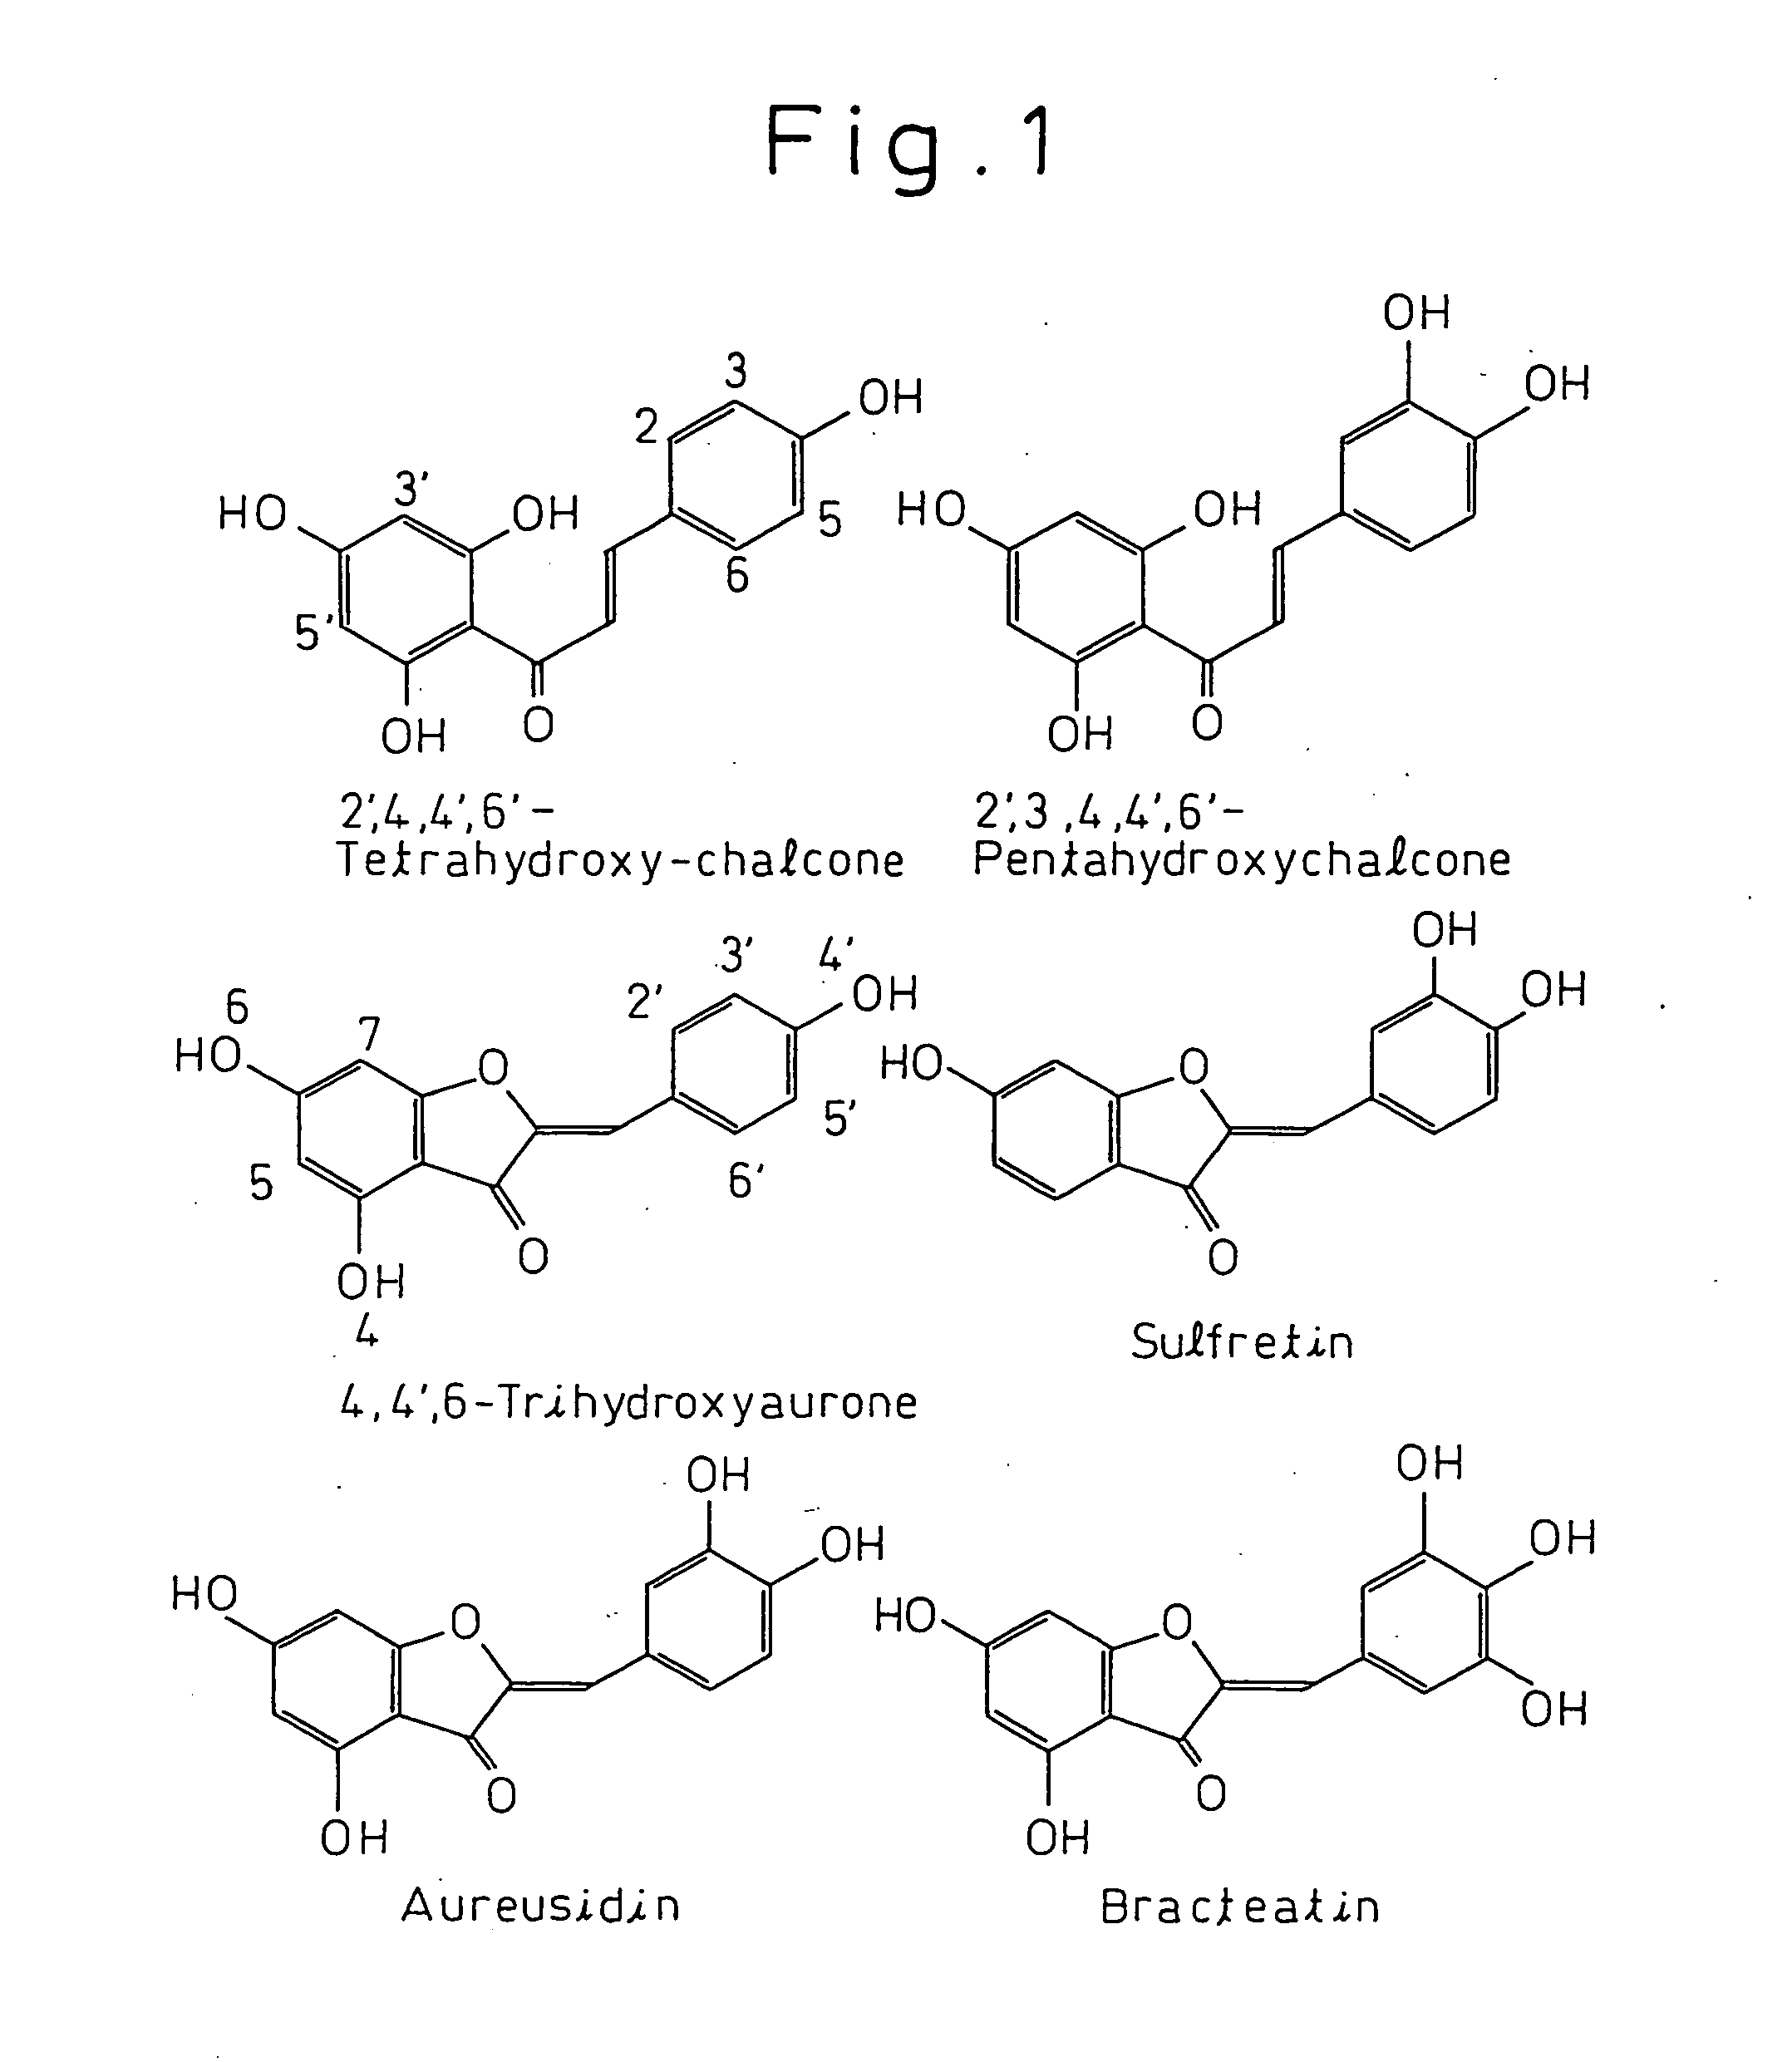 Gene encoding a protein having aurone synthesis activity